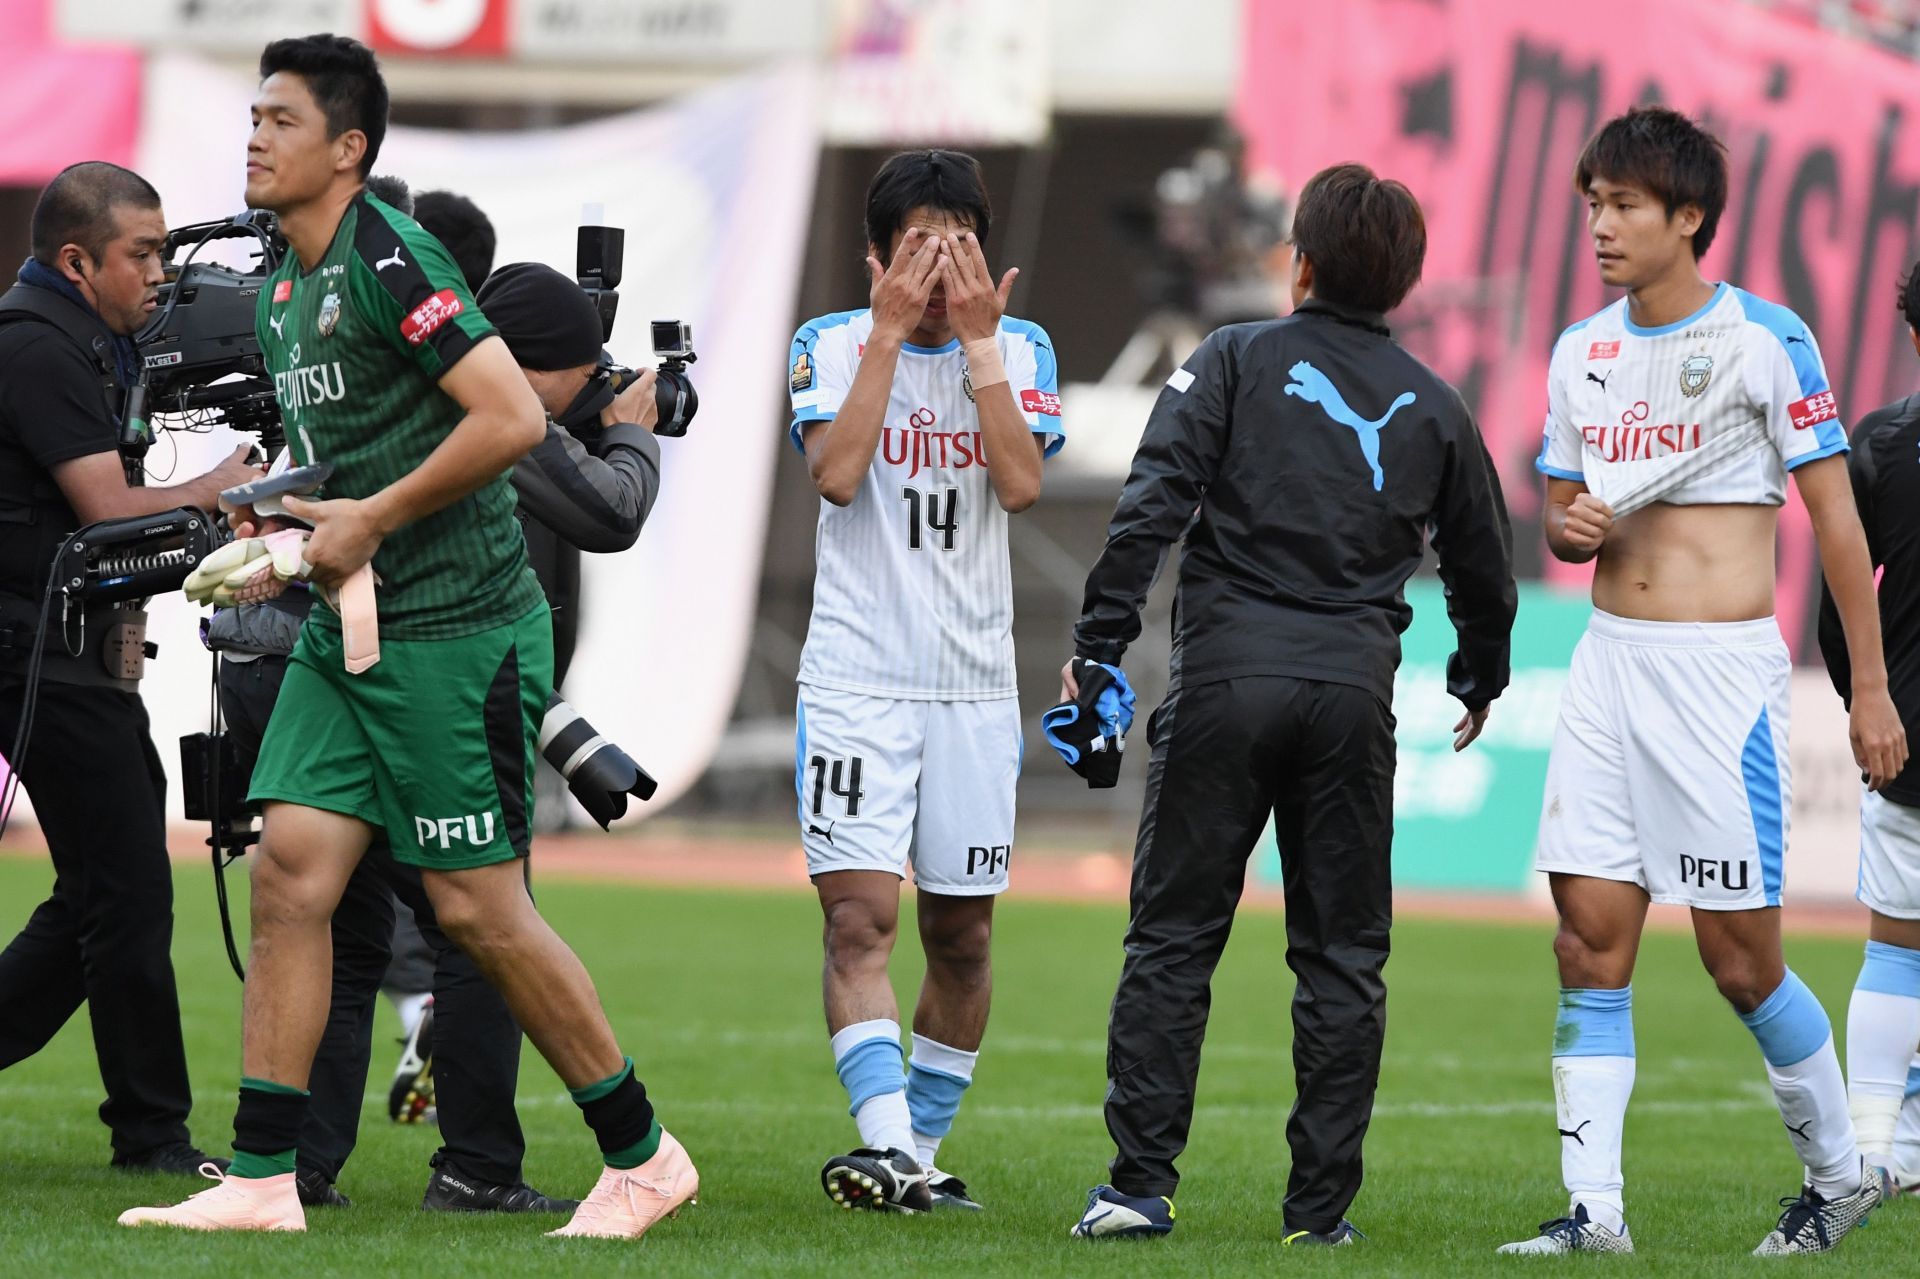 Jubilo Iwata have to play out of their skin to salvage anything from this game.